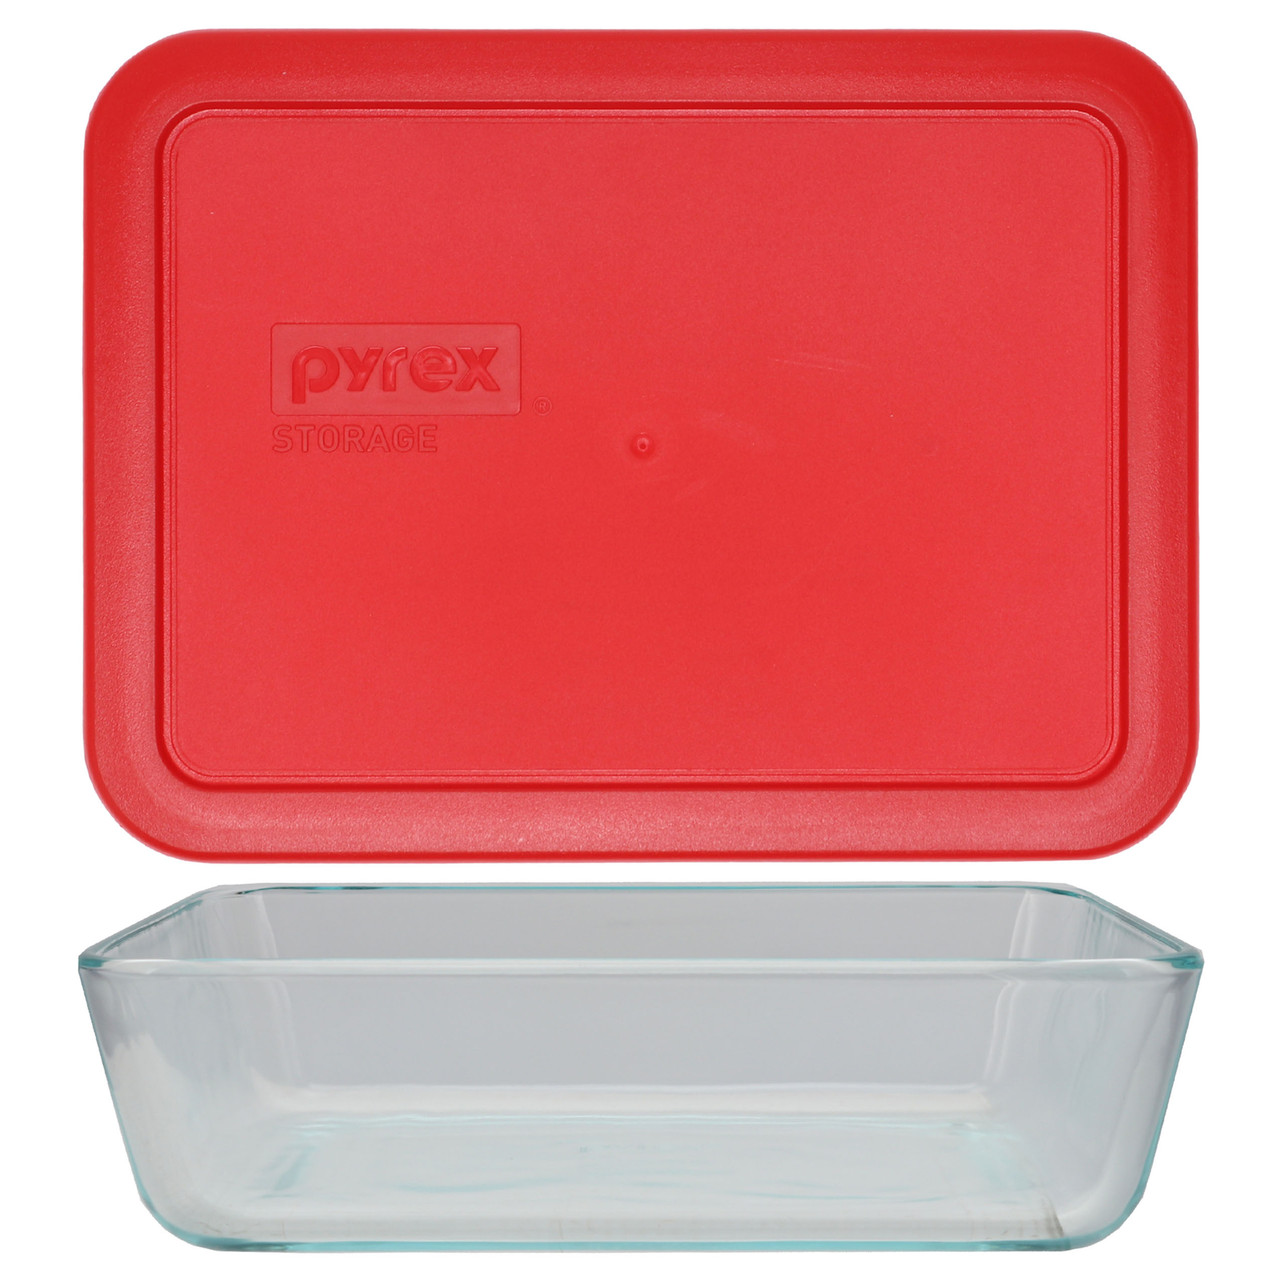 Pyrex 7210 3-Cup Rectangle Glass Storage Dish with 7210-PC Plastic Poppy Red Lid